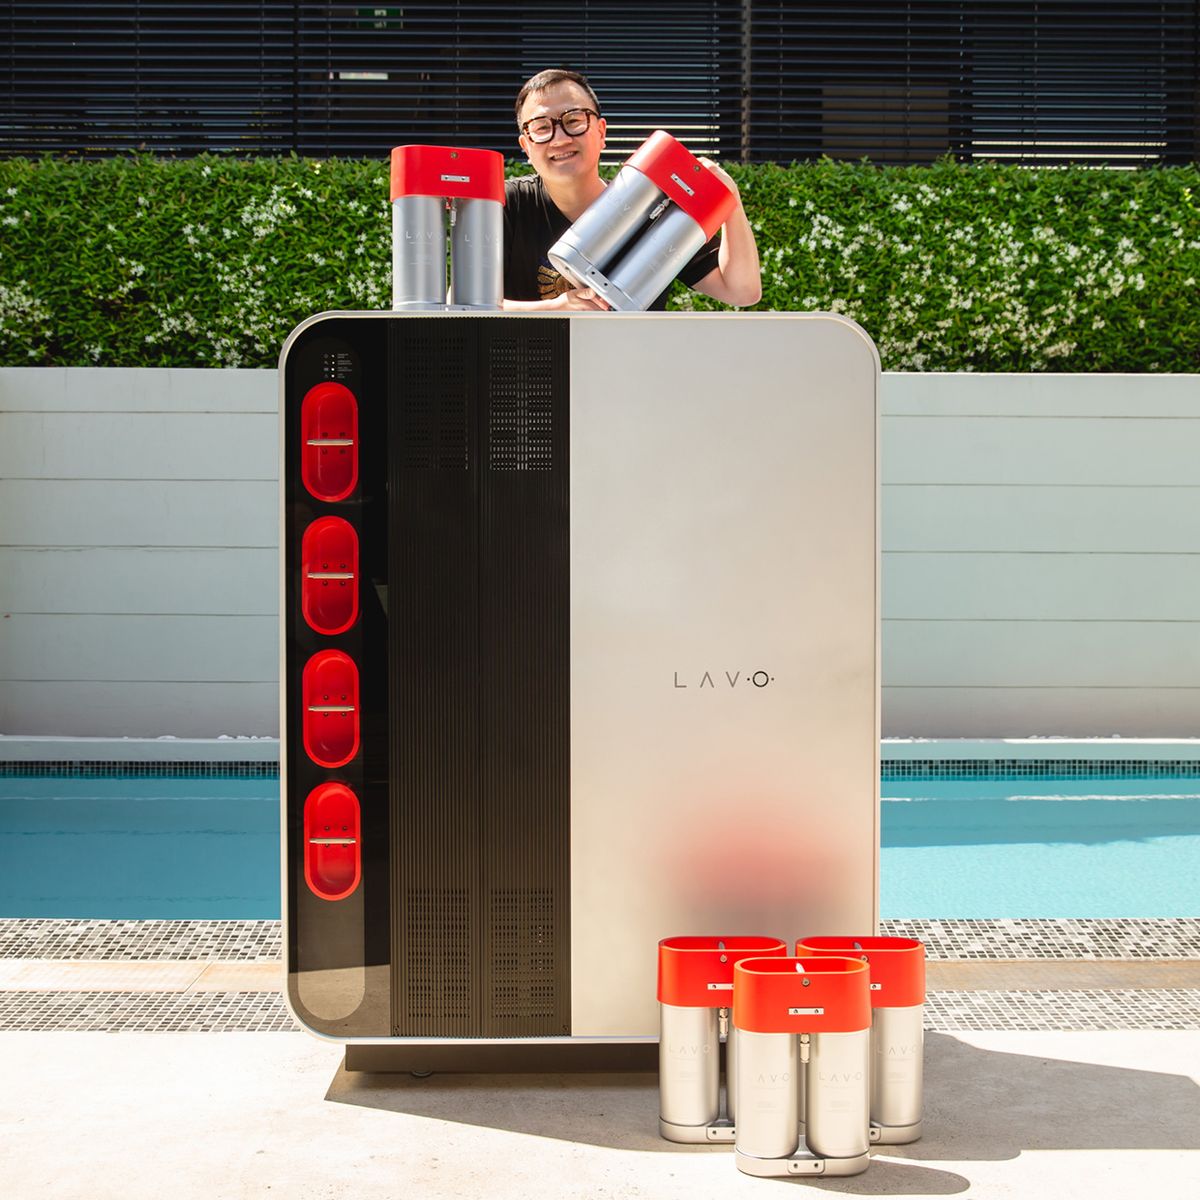 Alan Yu, CEO of Lavo, with his company's "hydrogen battery" technology. The residential unit, shown here, can store up to 40 kilowatt-hours of energy.